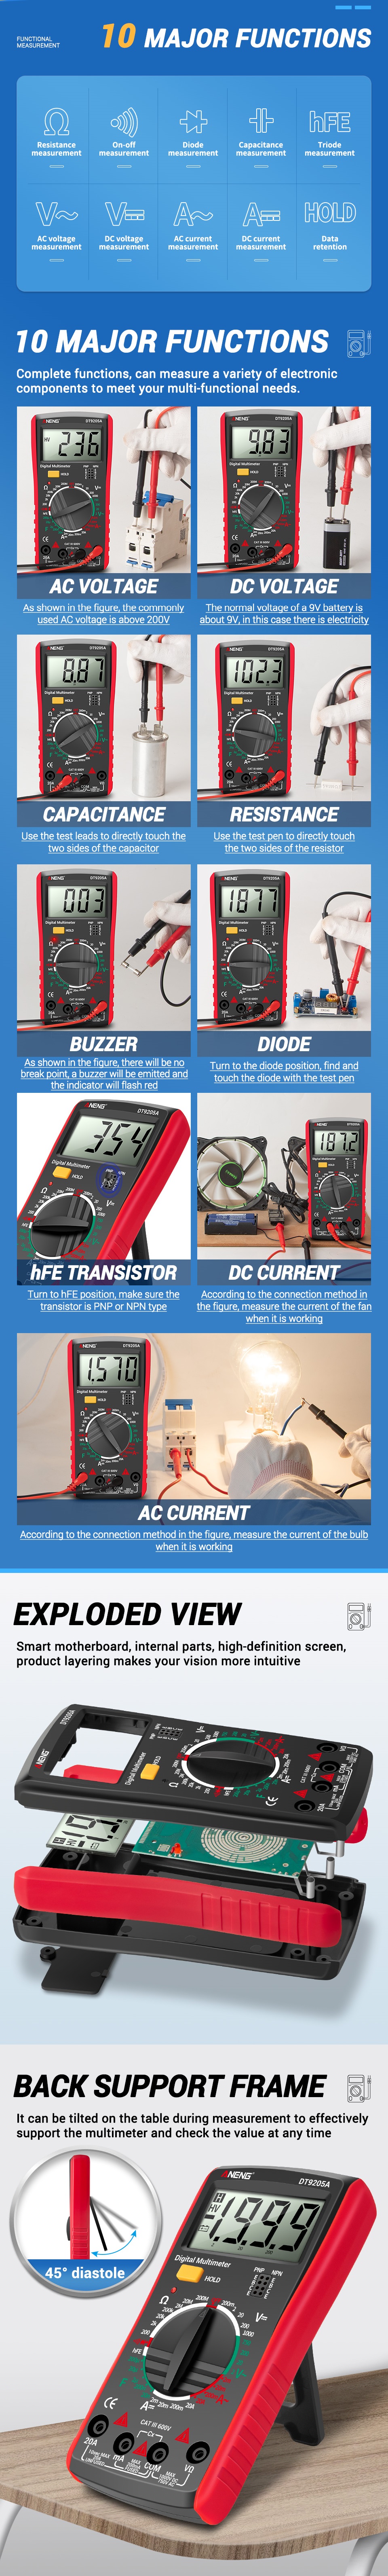 ANENG-DT9205A-Newly-HD-Digital-True-RMS-Professional-Multimeter-Auto-ACDC-Voltage-Current-Tester-Buz-1833659-2